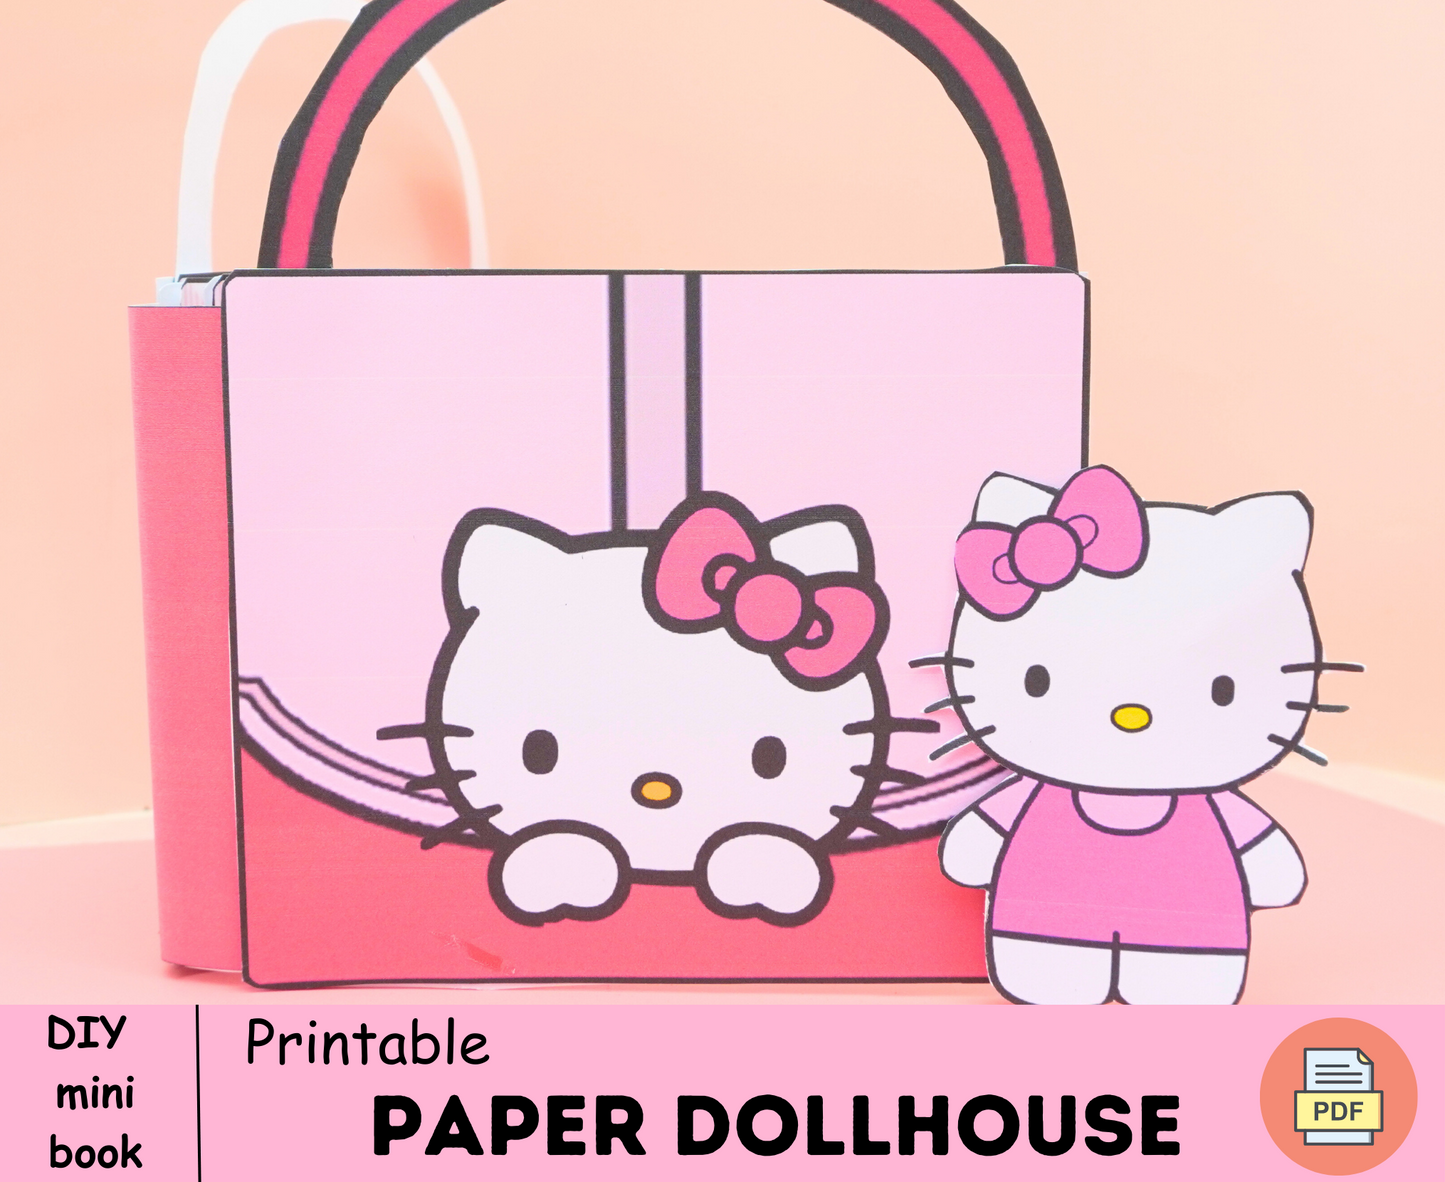 Hello Kitty bag🌈 Busy Book Activity bag for Kitty Printable | Mini Bag | Busy Book print for toddler | Dollhouse Book | DIY paper dolls house🌈 Woa Doll Crafts